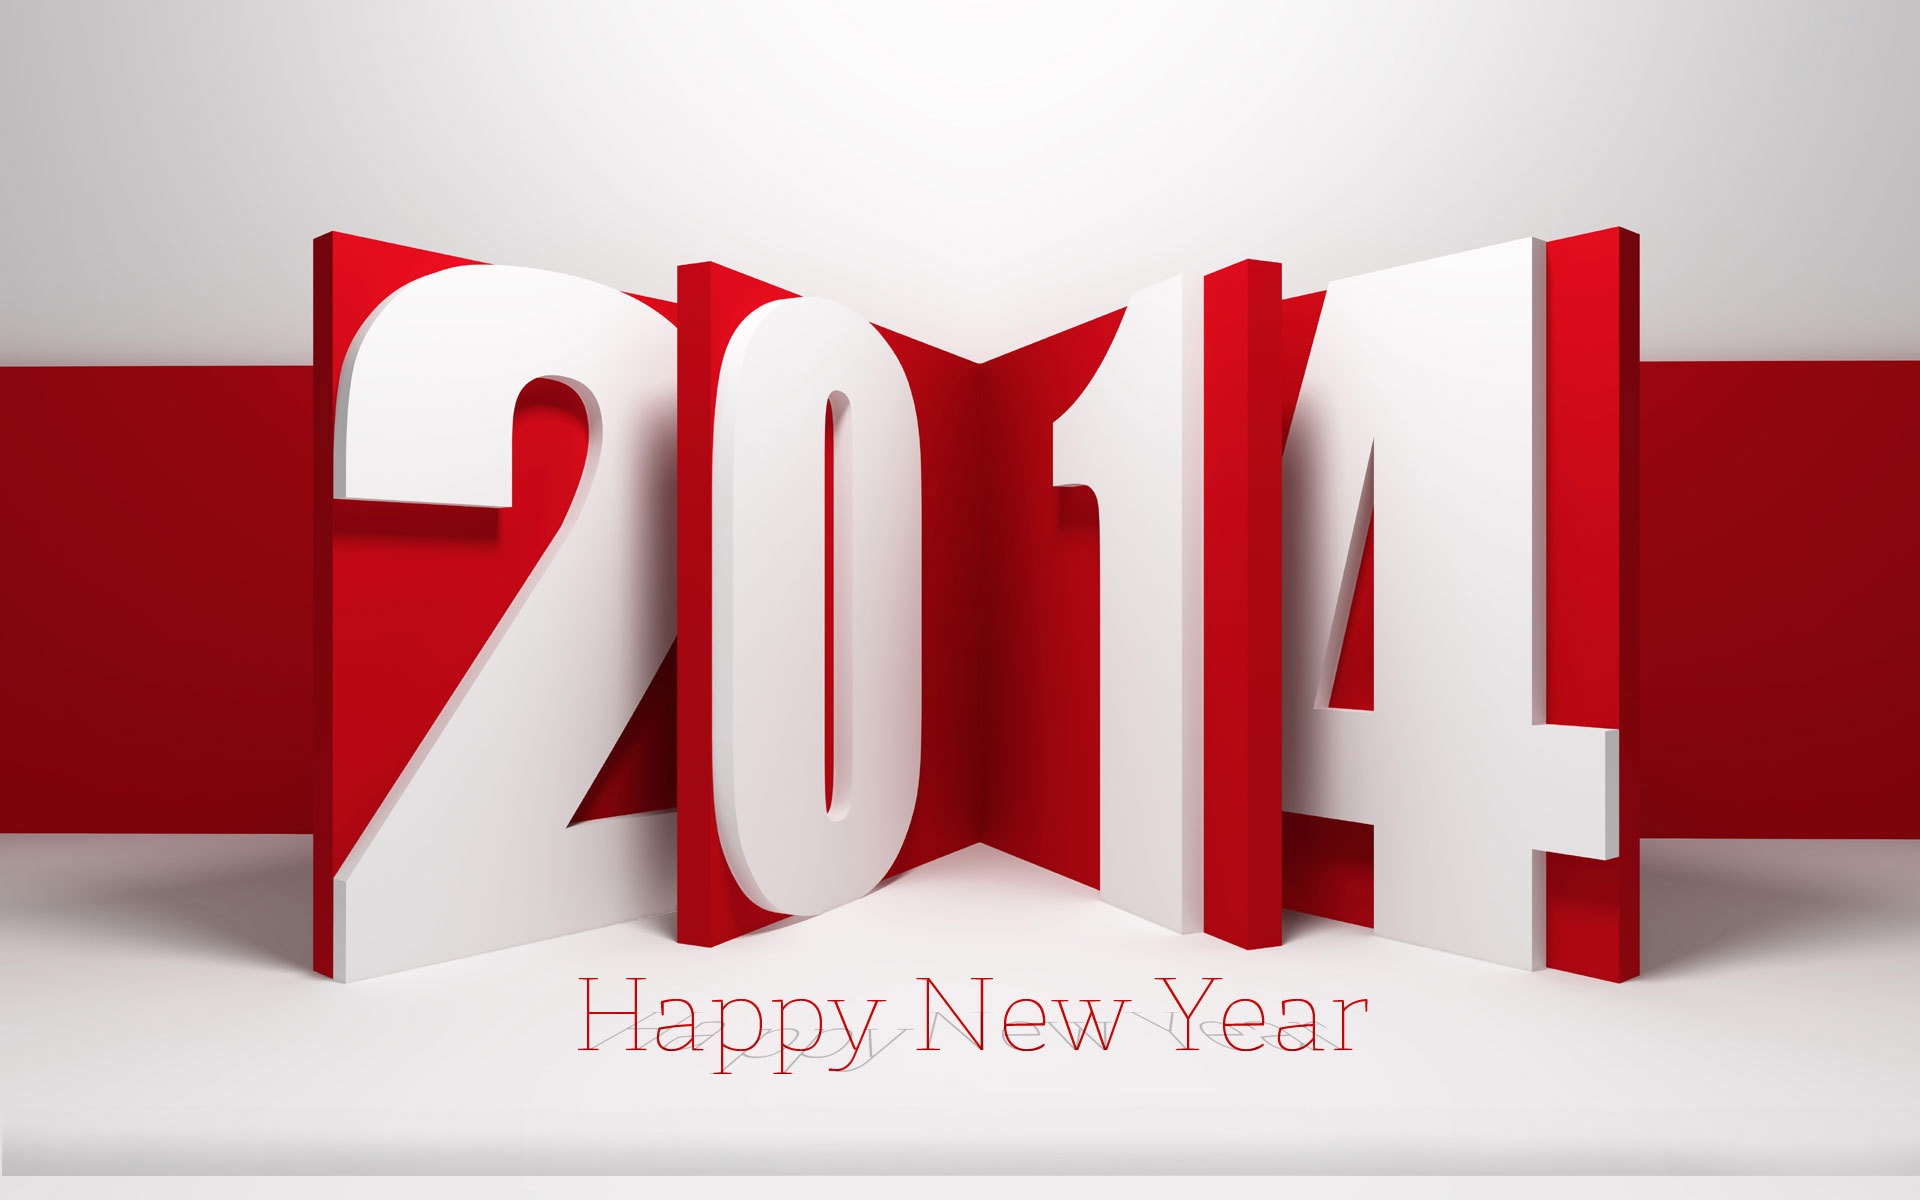 Nice wallpapers New Year 2014 1920x1200px